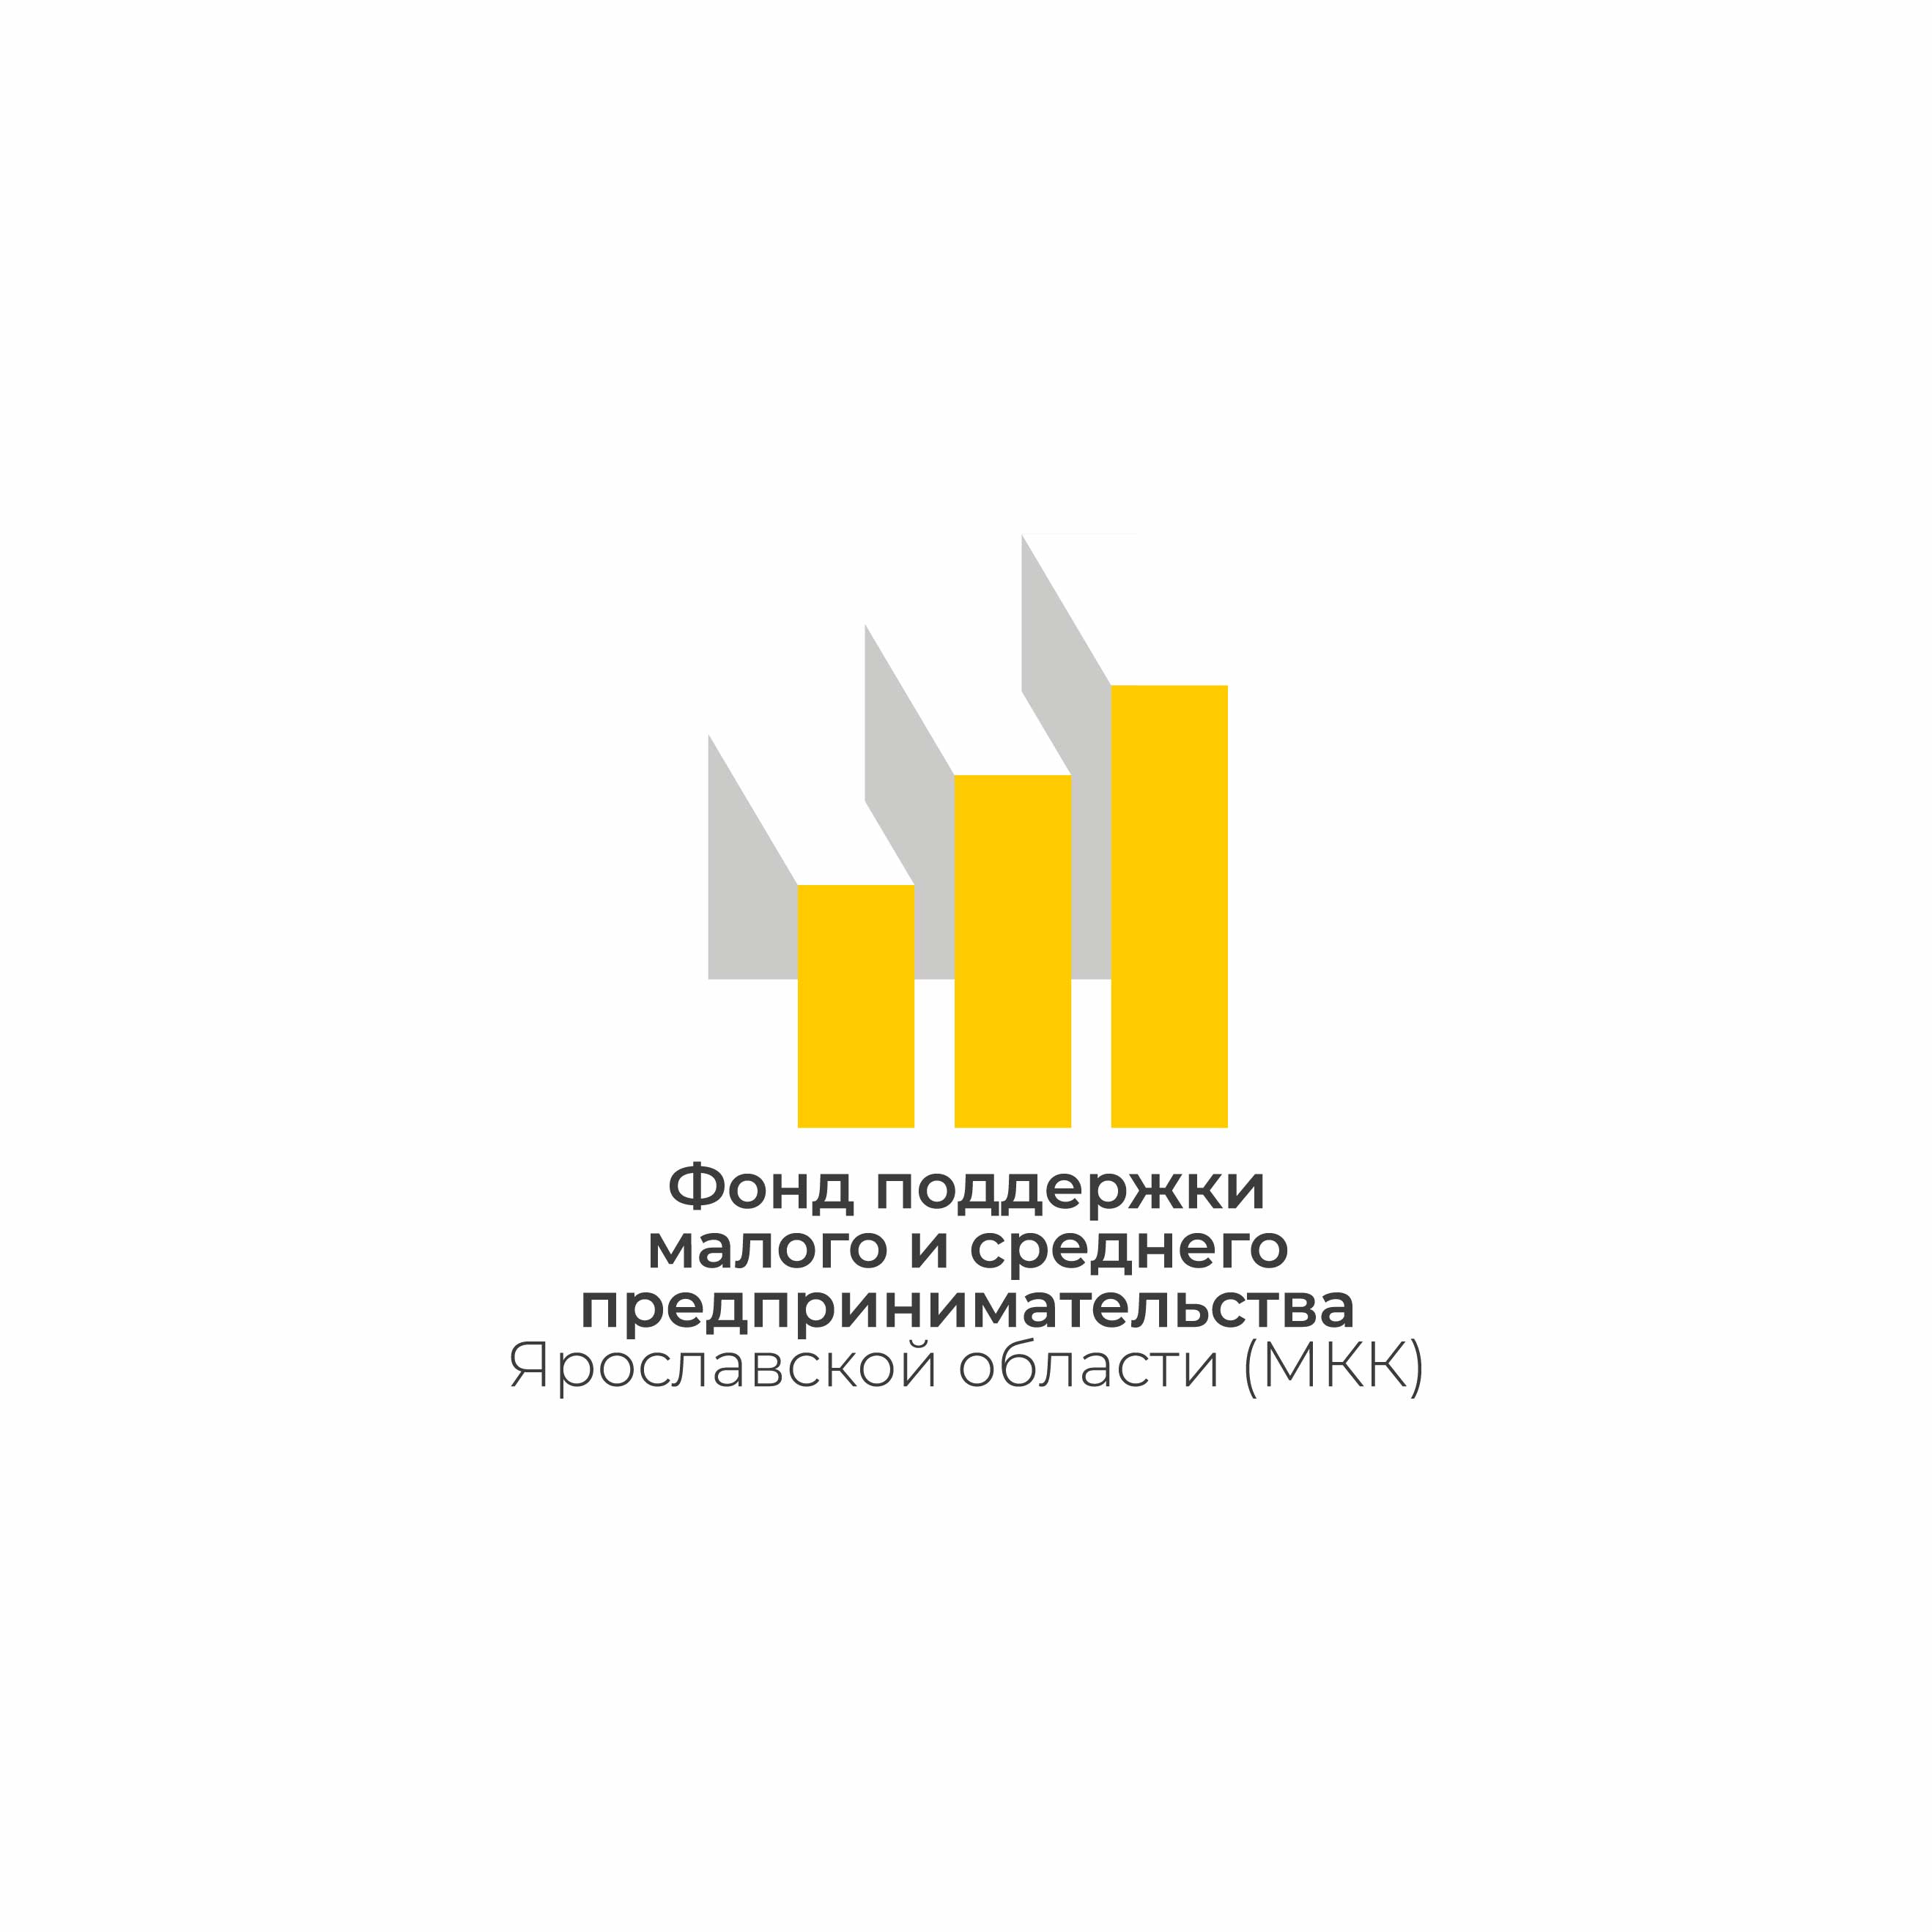 Fund for the Support of Small and Medium-sized Enterprises of the Yaroslavl region